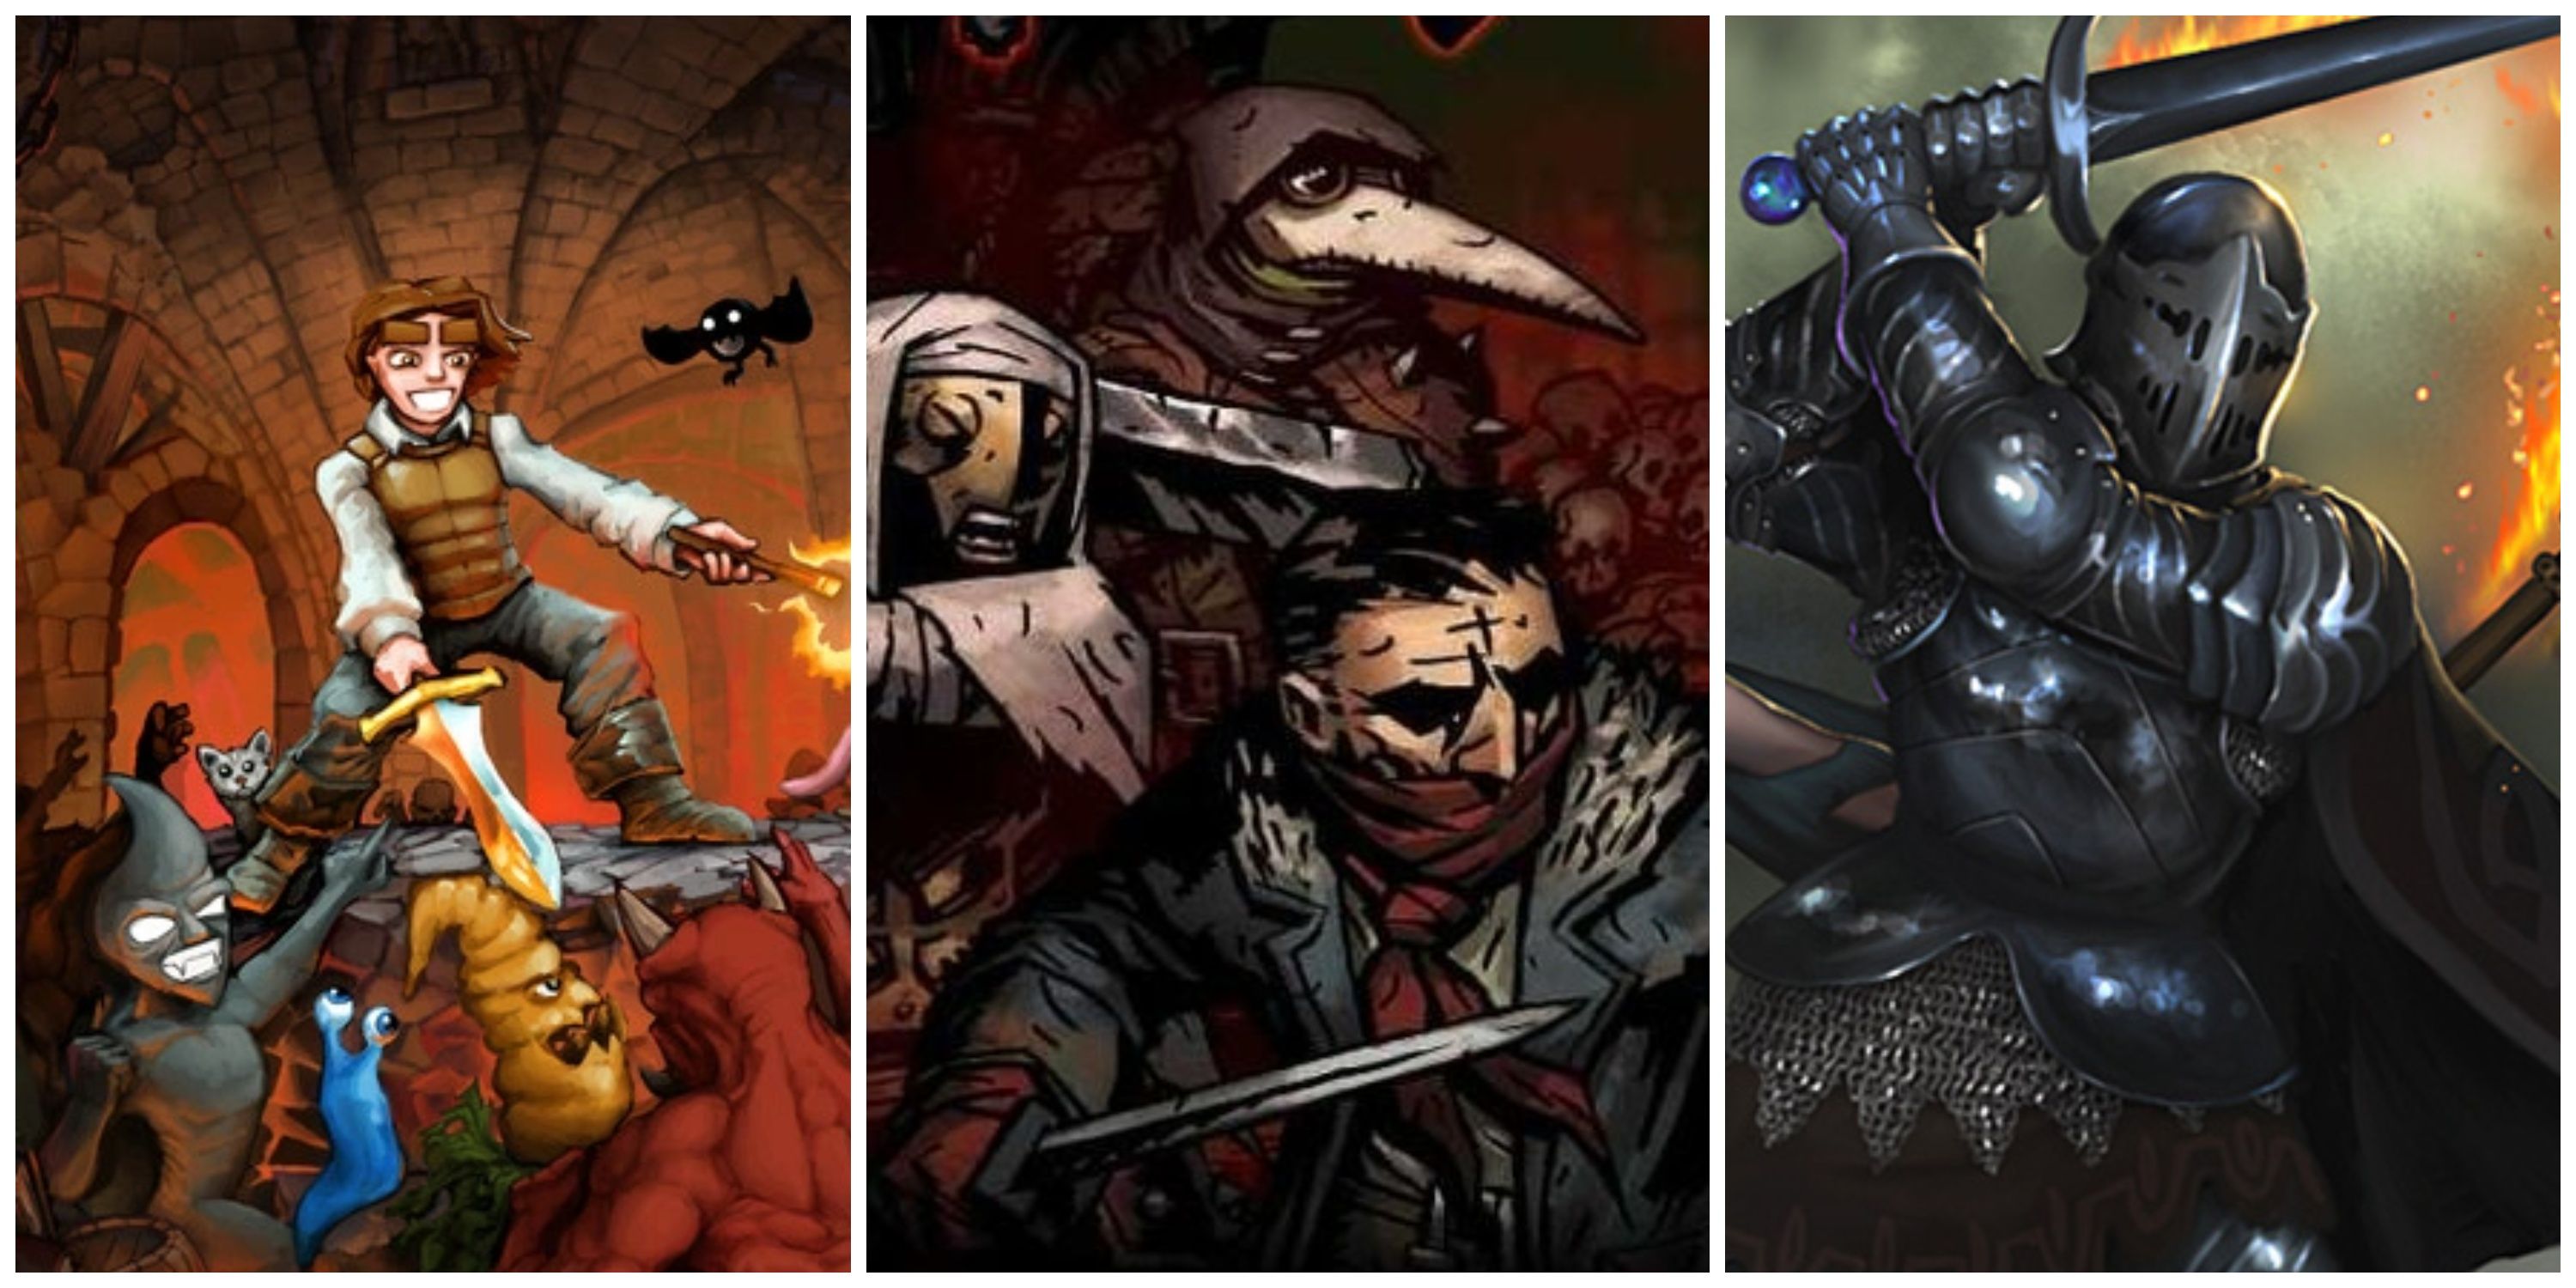 Best Fantasy Roguelikes (Featured Image) - Dungeons Of Dredmor + Darkest Dungeon + Tales Of Maj'Eyal